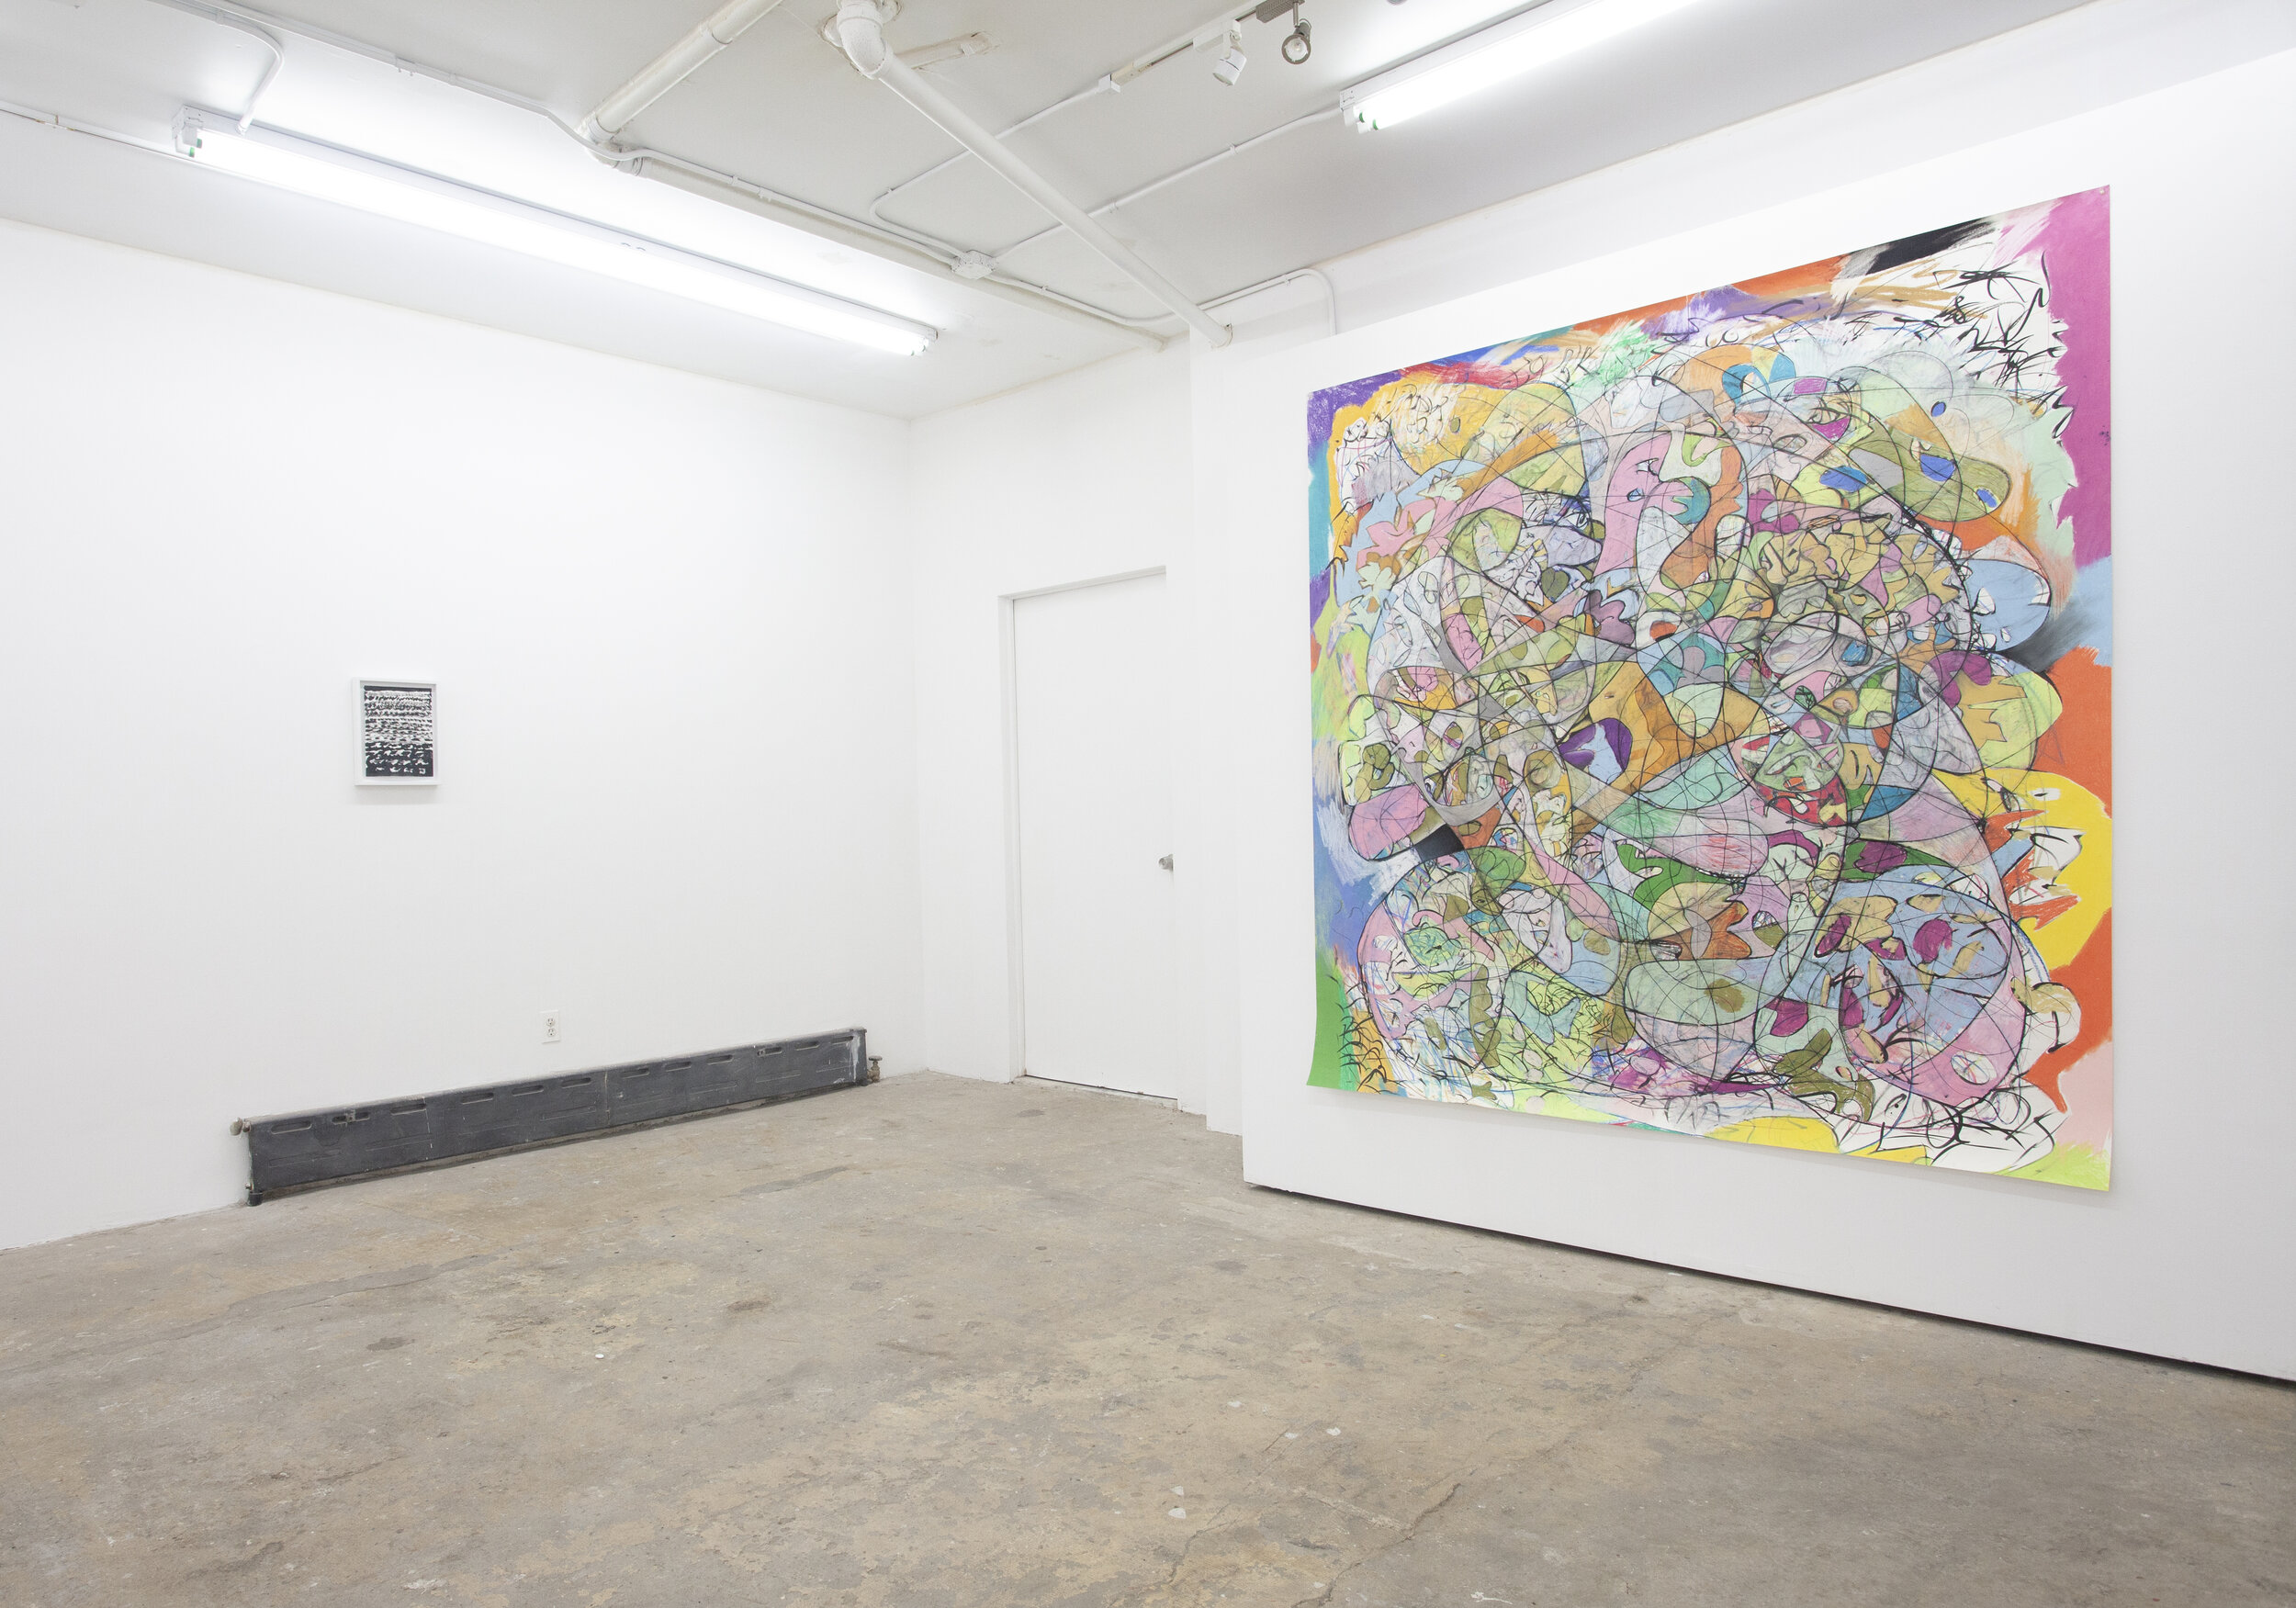 Installation image of works on paper by Rusty Shackleford from his 2017 exhibition, The Physicality of Revisiting Old Haunts, at Cindy Rucker Gallery